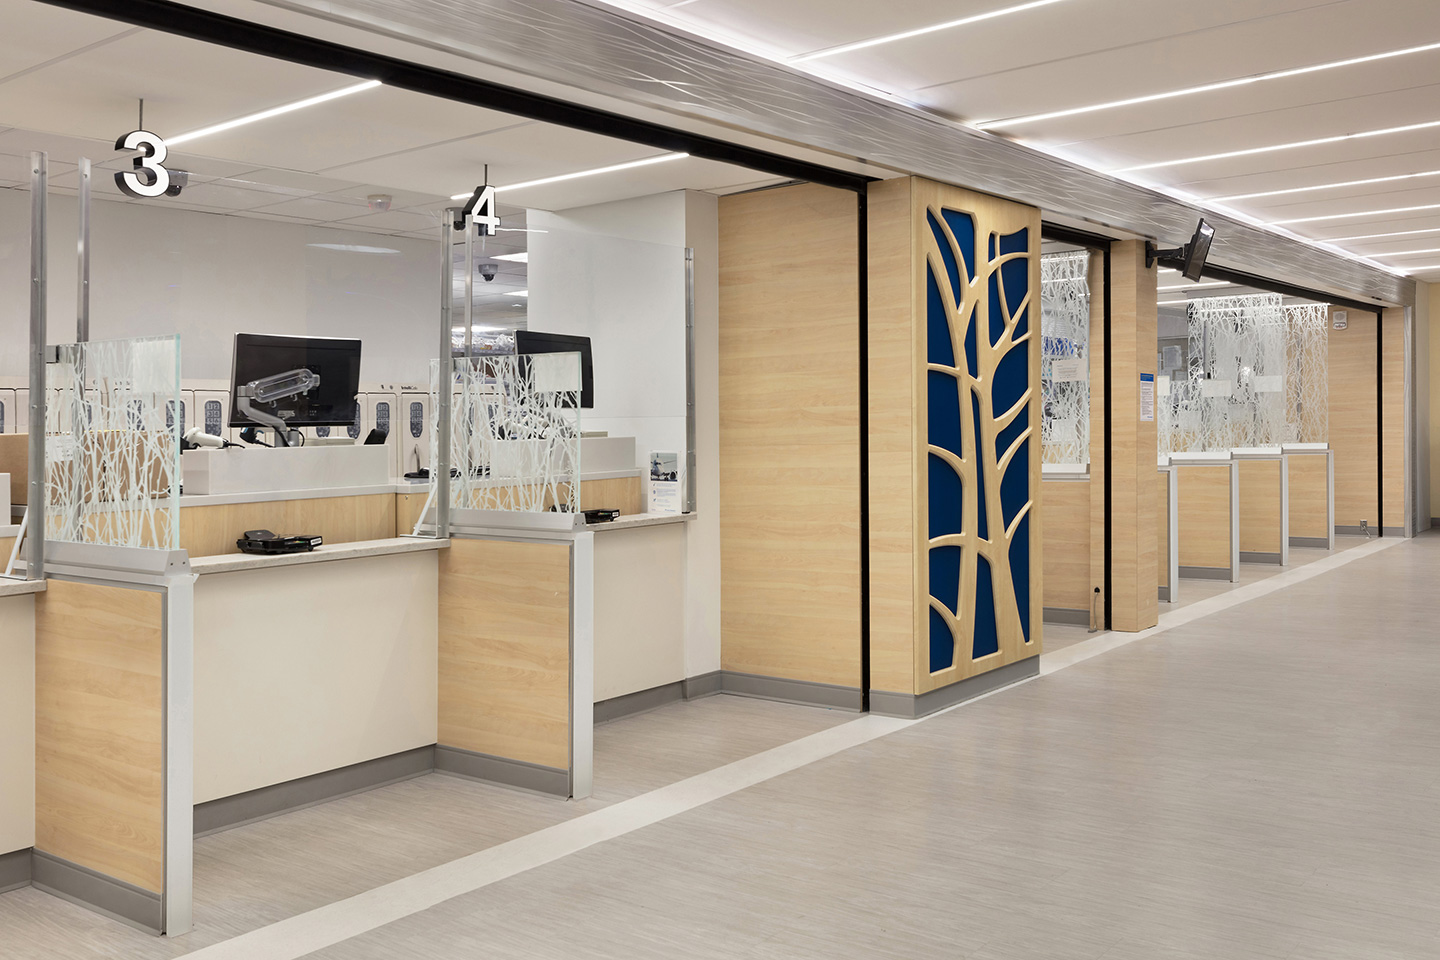 Organic shapes and materials help to create a welcoming environment in the pharmacy. 